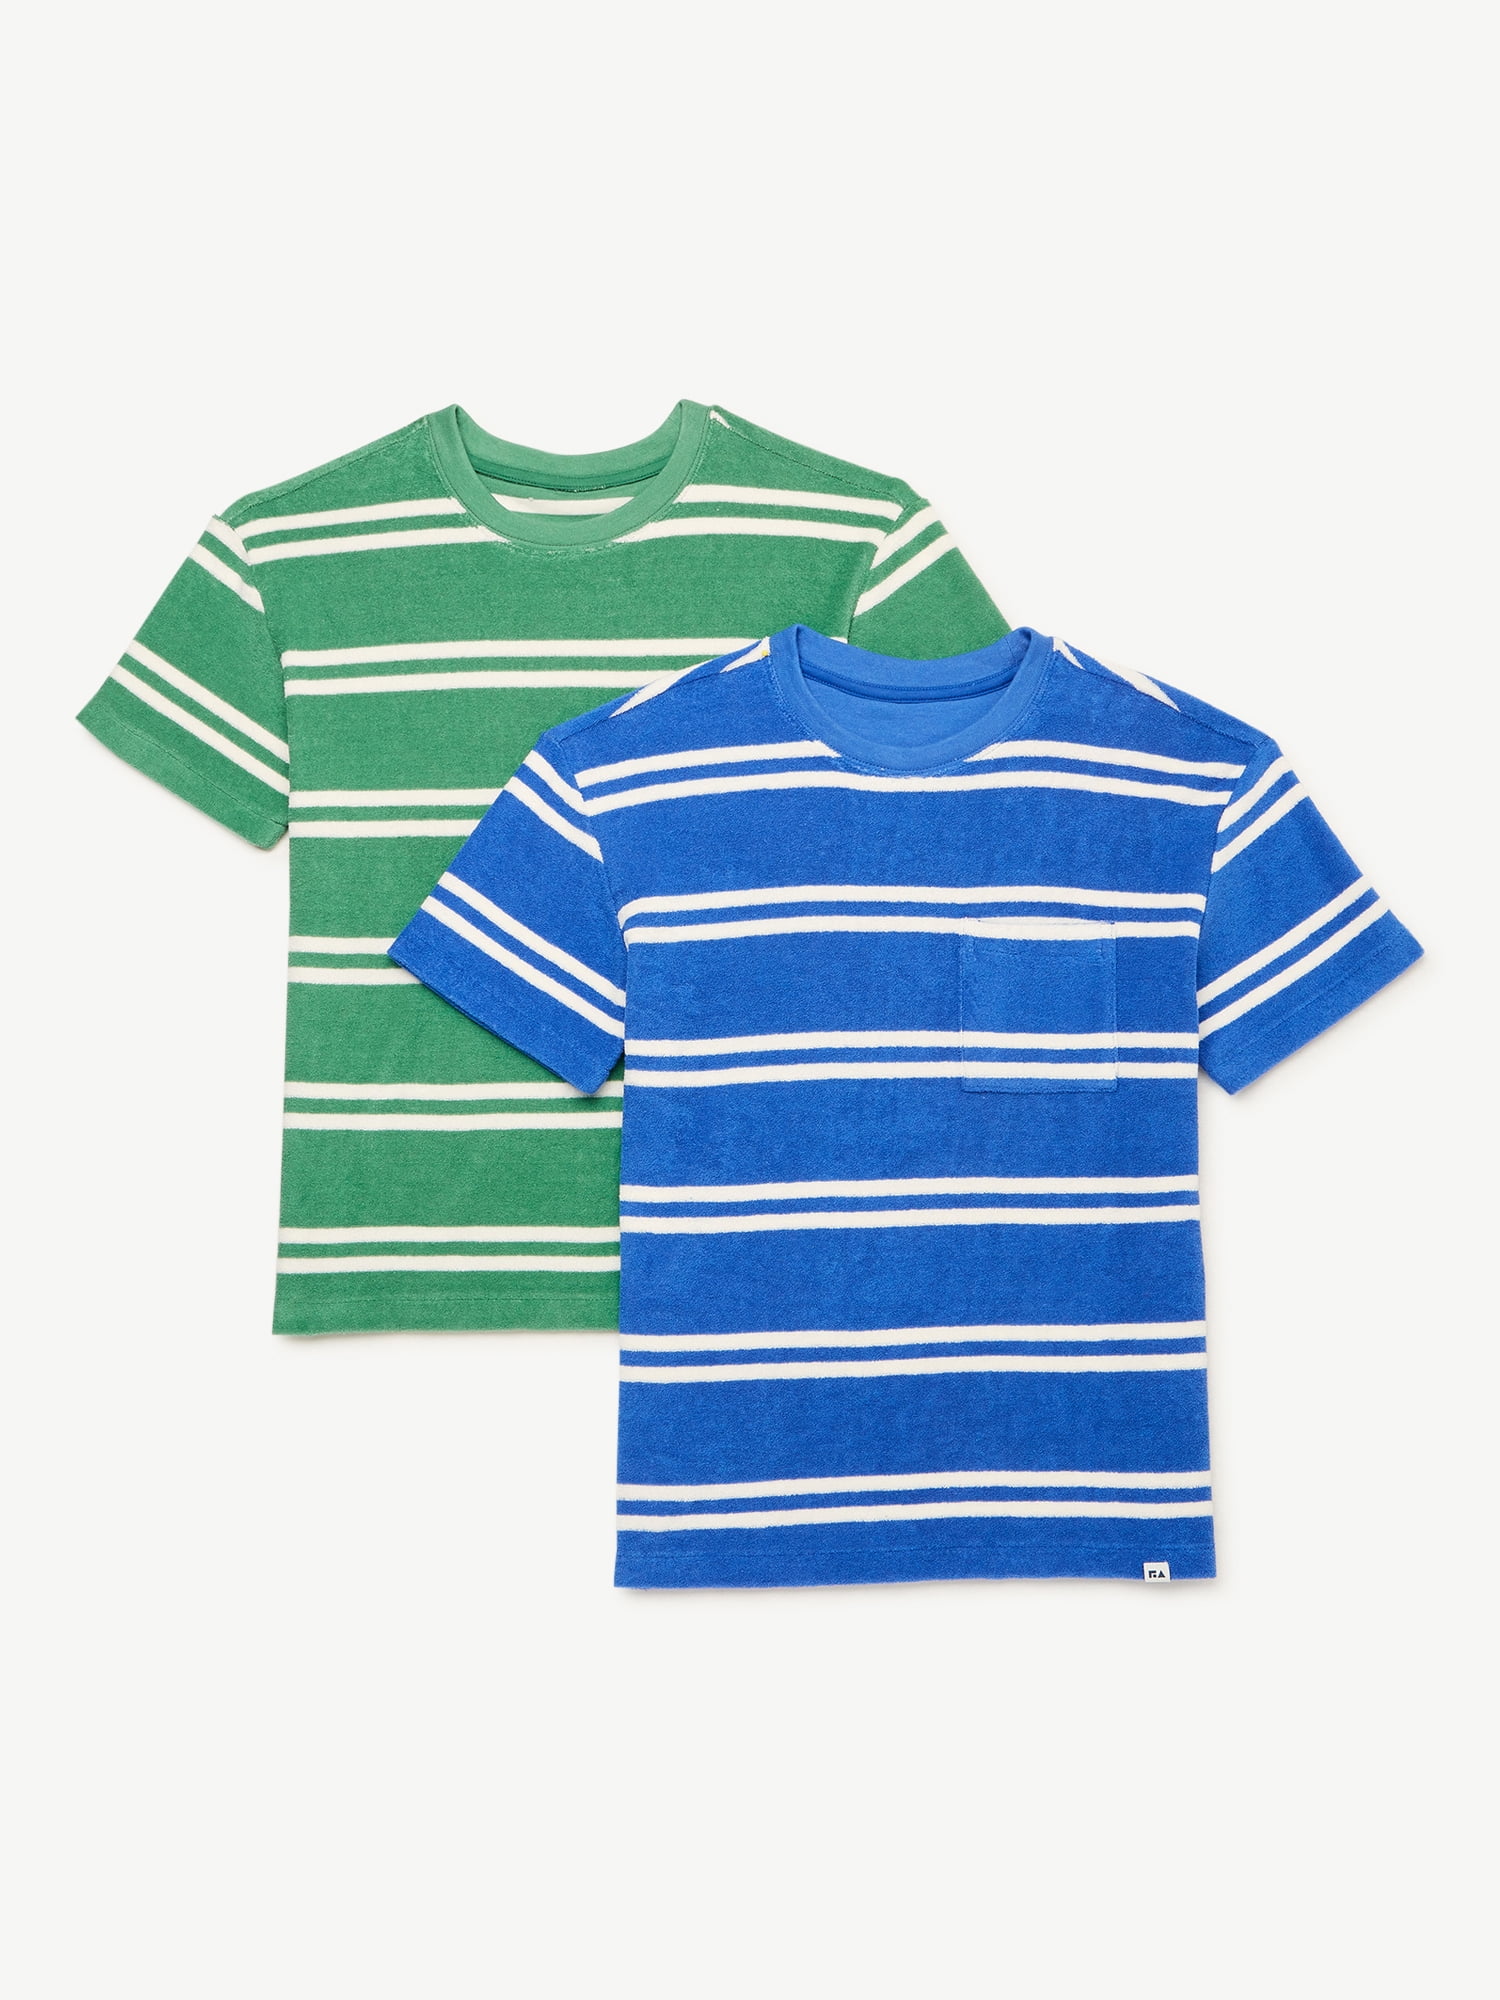 Girls 2 pack Dark Green Polo Shirts Size 4-5 or 14-15 years 